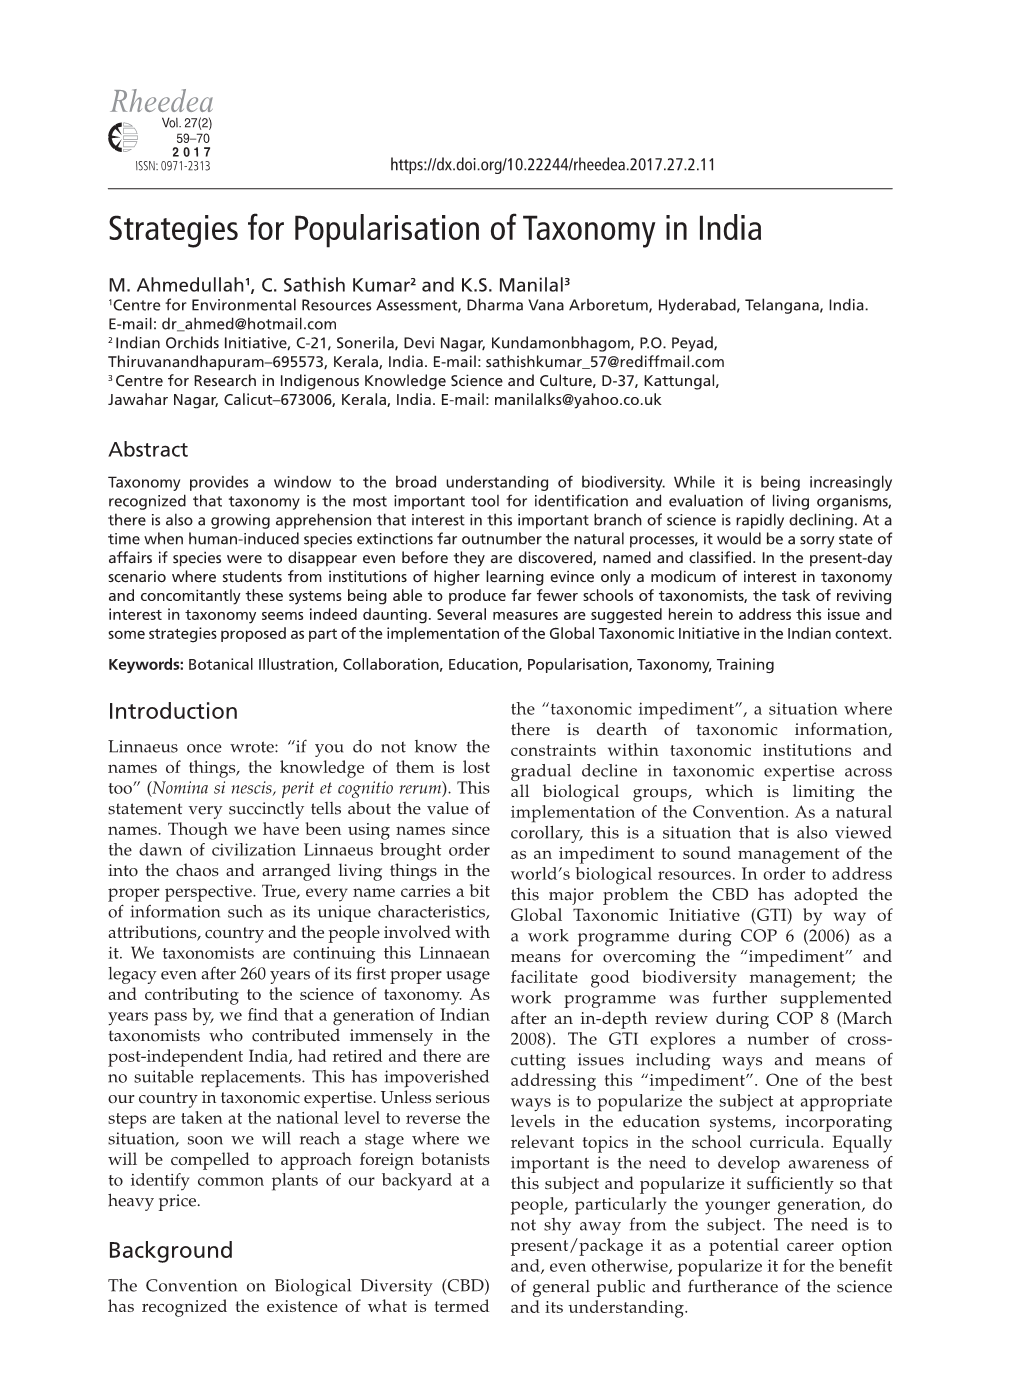 Strategies for Popularisation of Taxonomy in India